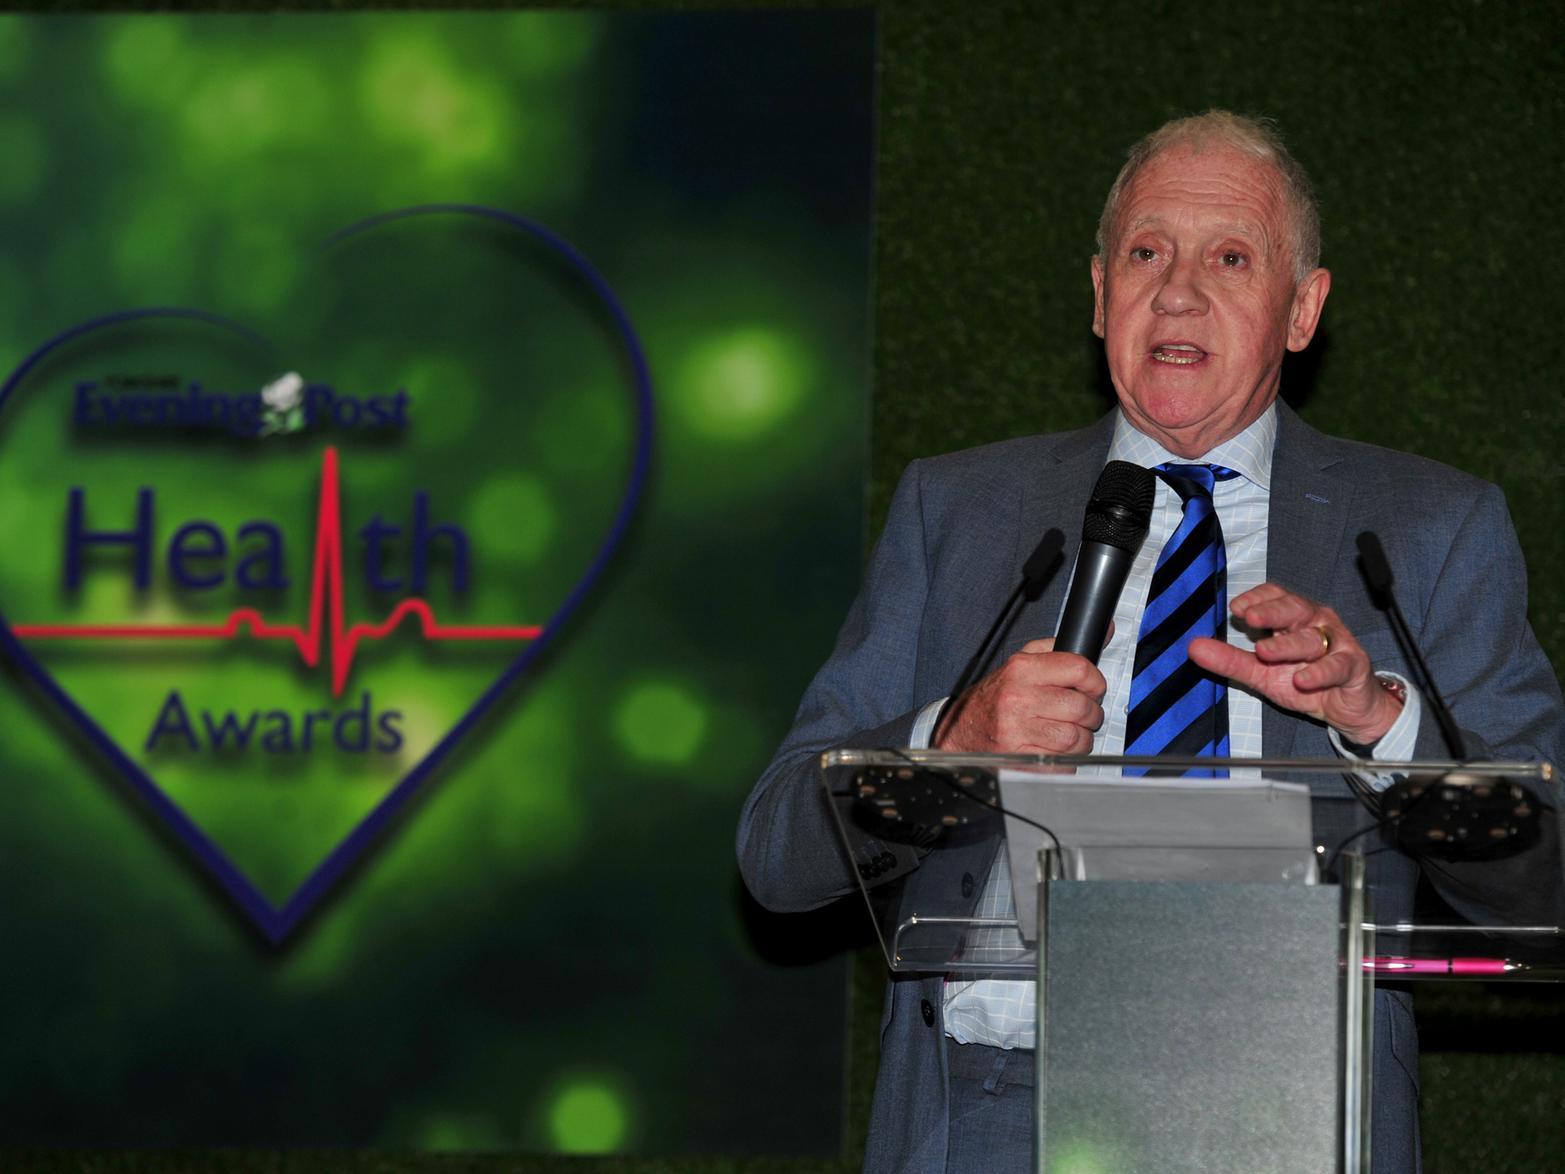 The Yorkshire Evening Post Health Awards 2019 were hosted by BBC Look North presenter Harry Gration